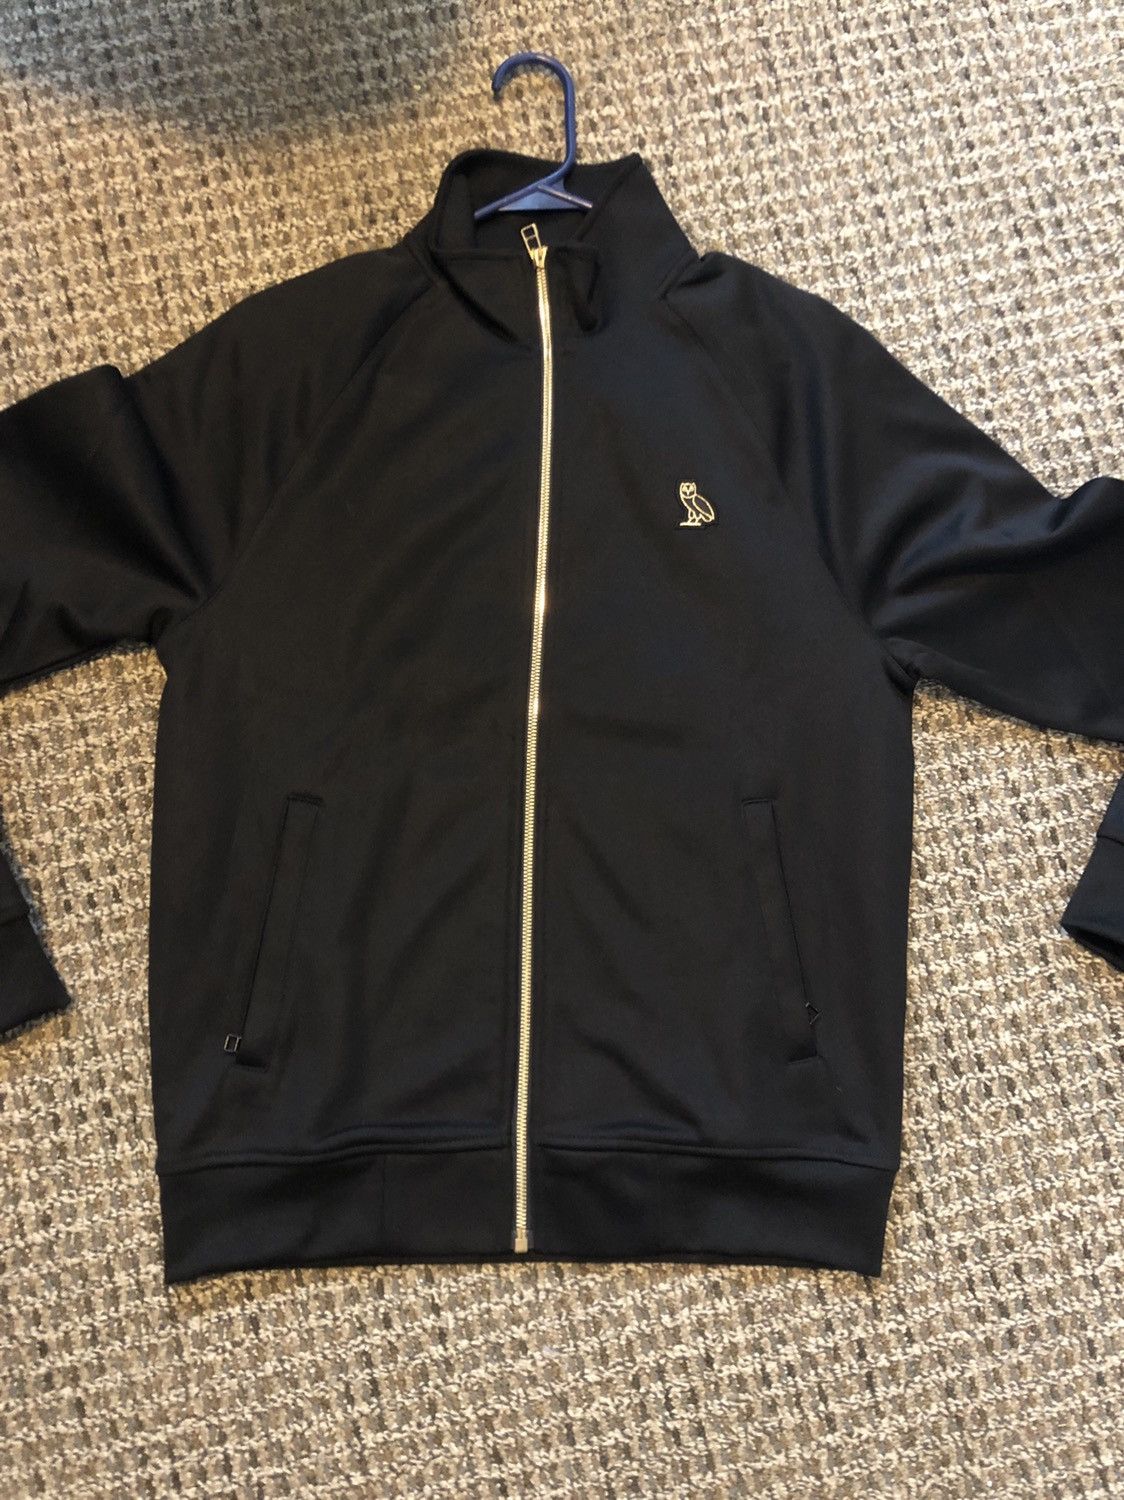 Octobers Very Own Ovo Pique Track Jacket | Grailed